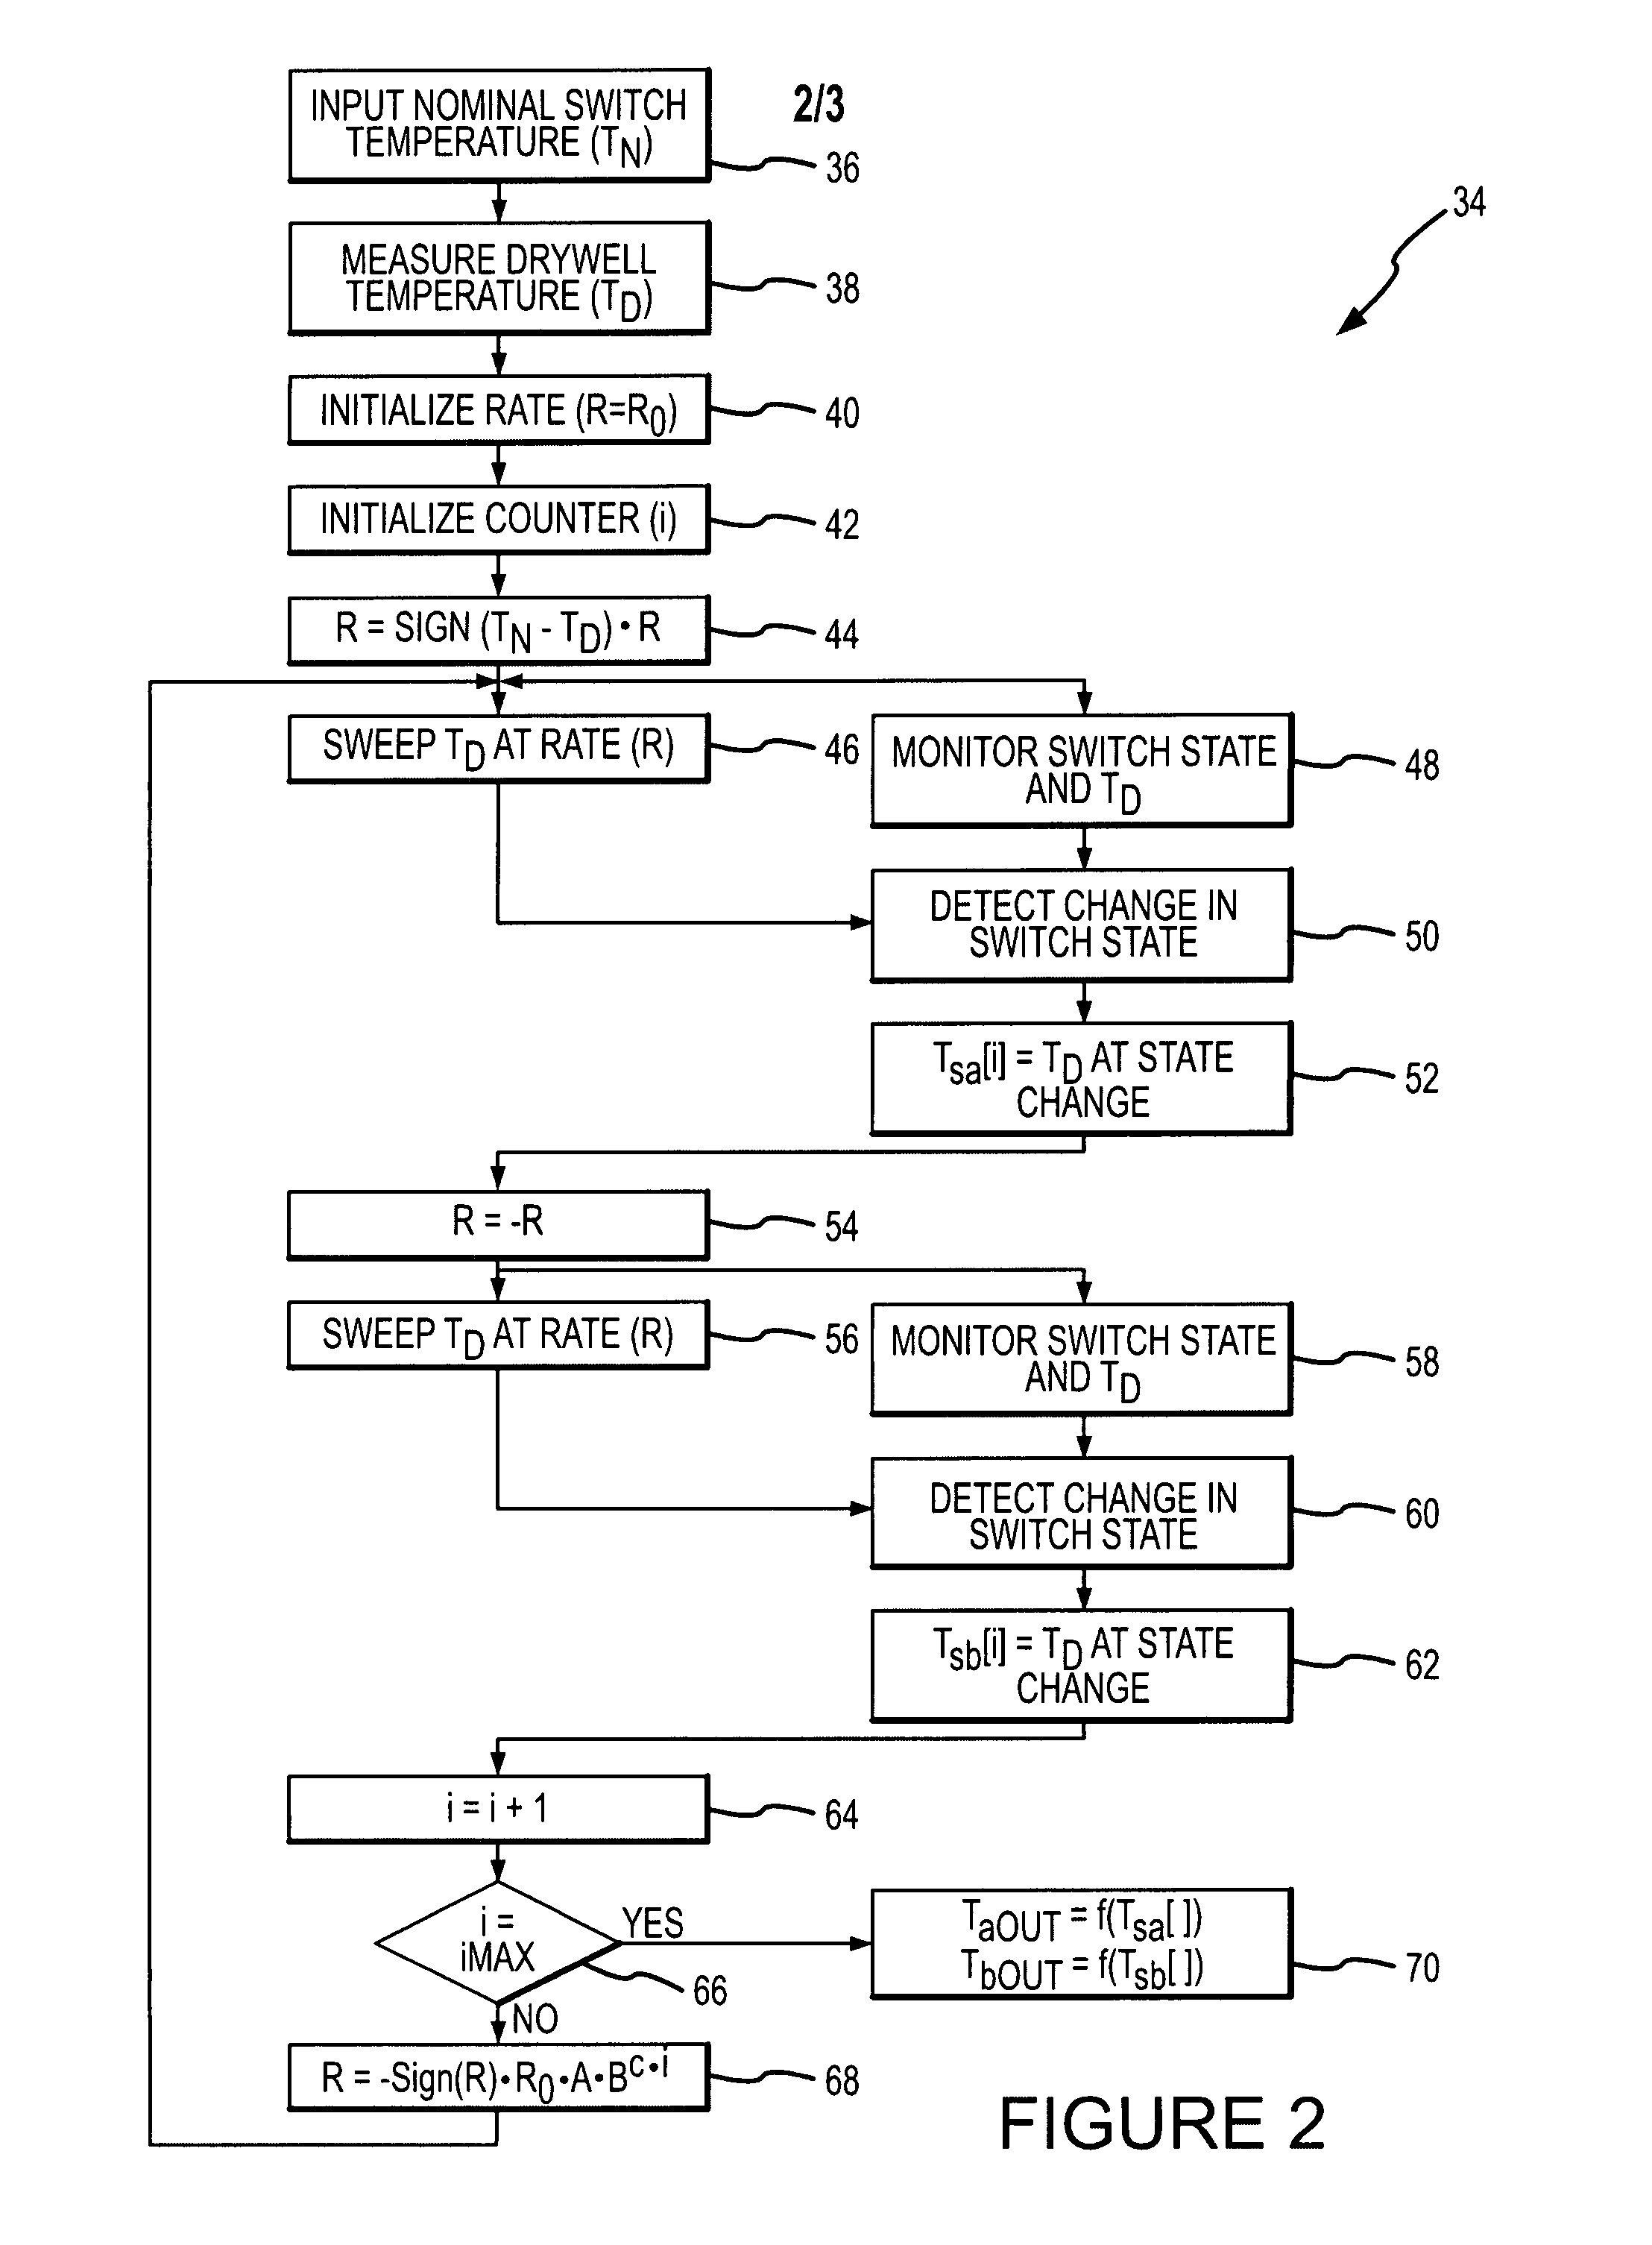 Thermal switch calibration apparatus and methods